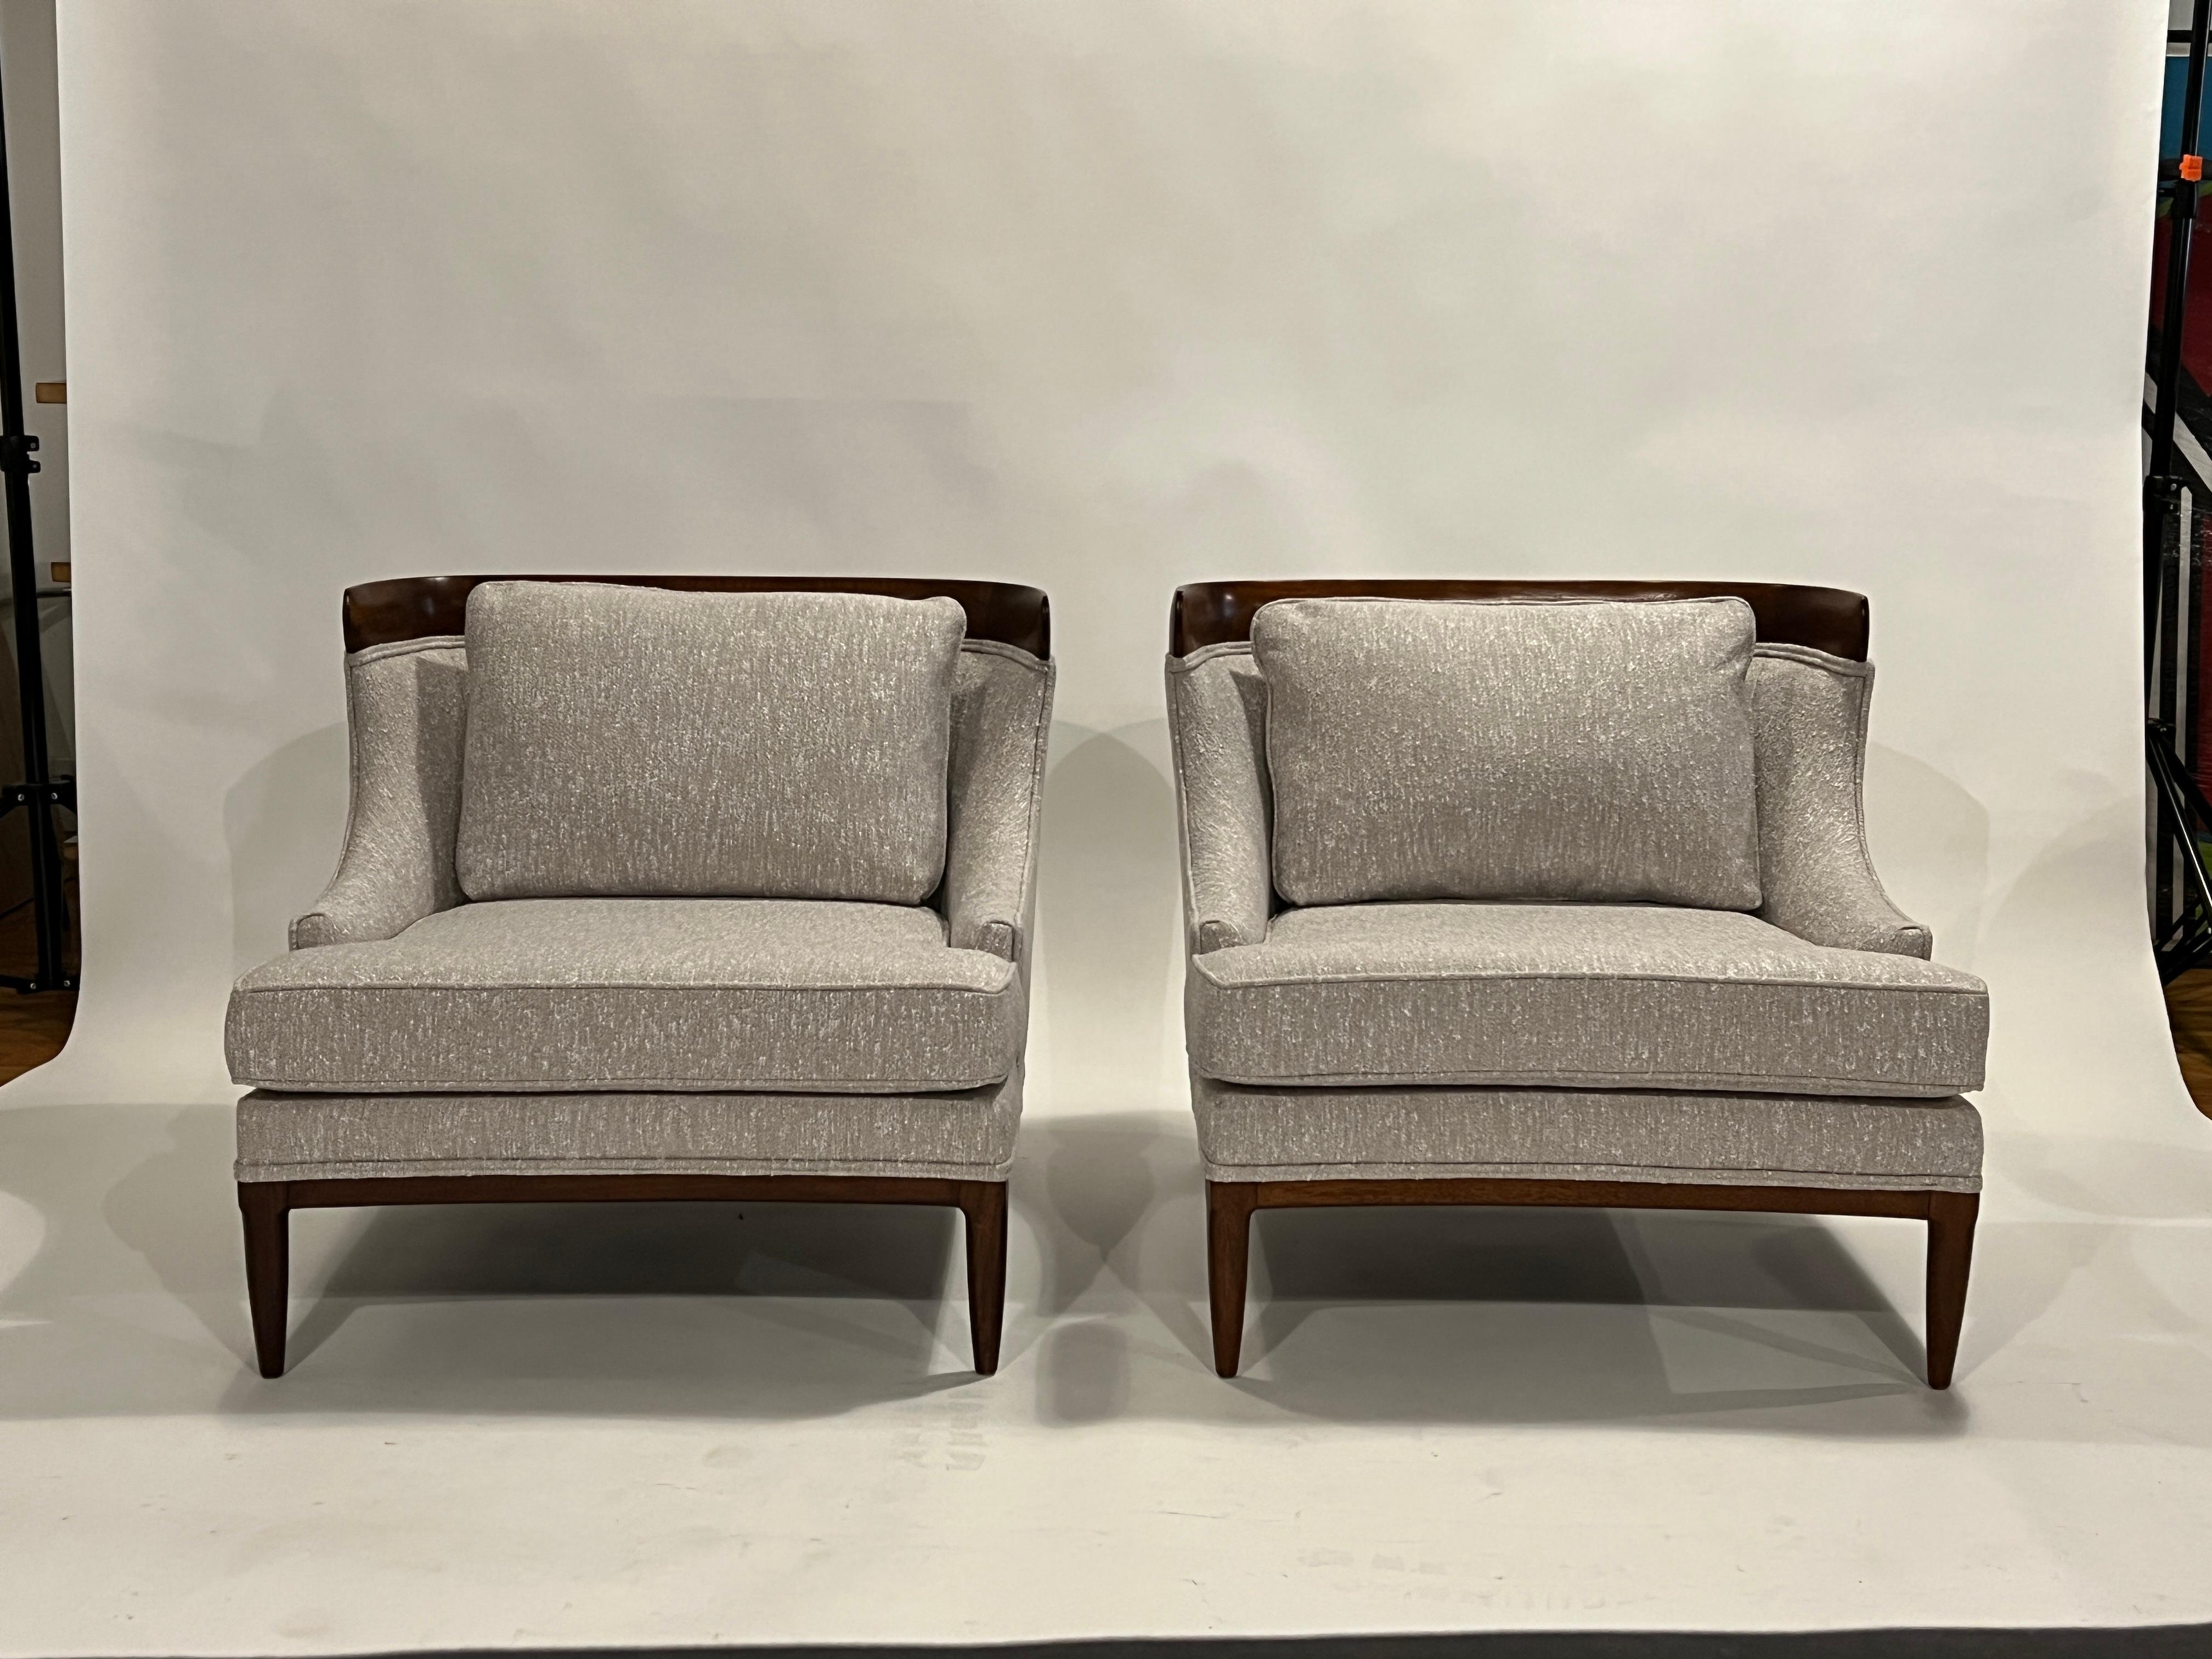 Iconic pair of Hollywood Regency lounge chairs by Erwin Lambeth from the Sophisticate Collection for Tomlinson, 1950's. 
These vintage chairs have been completely restored in the original walnut stain wood and upholstered in a beige and white